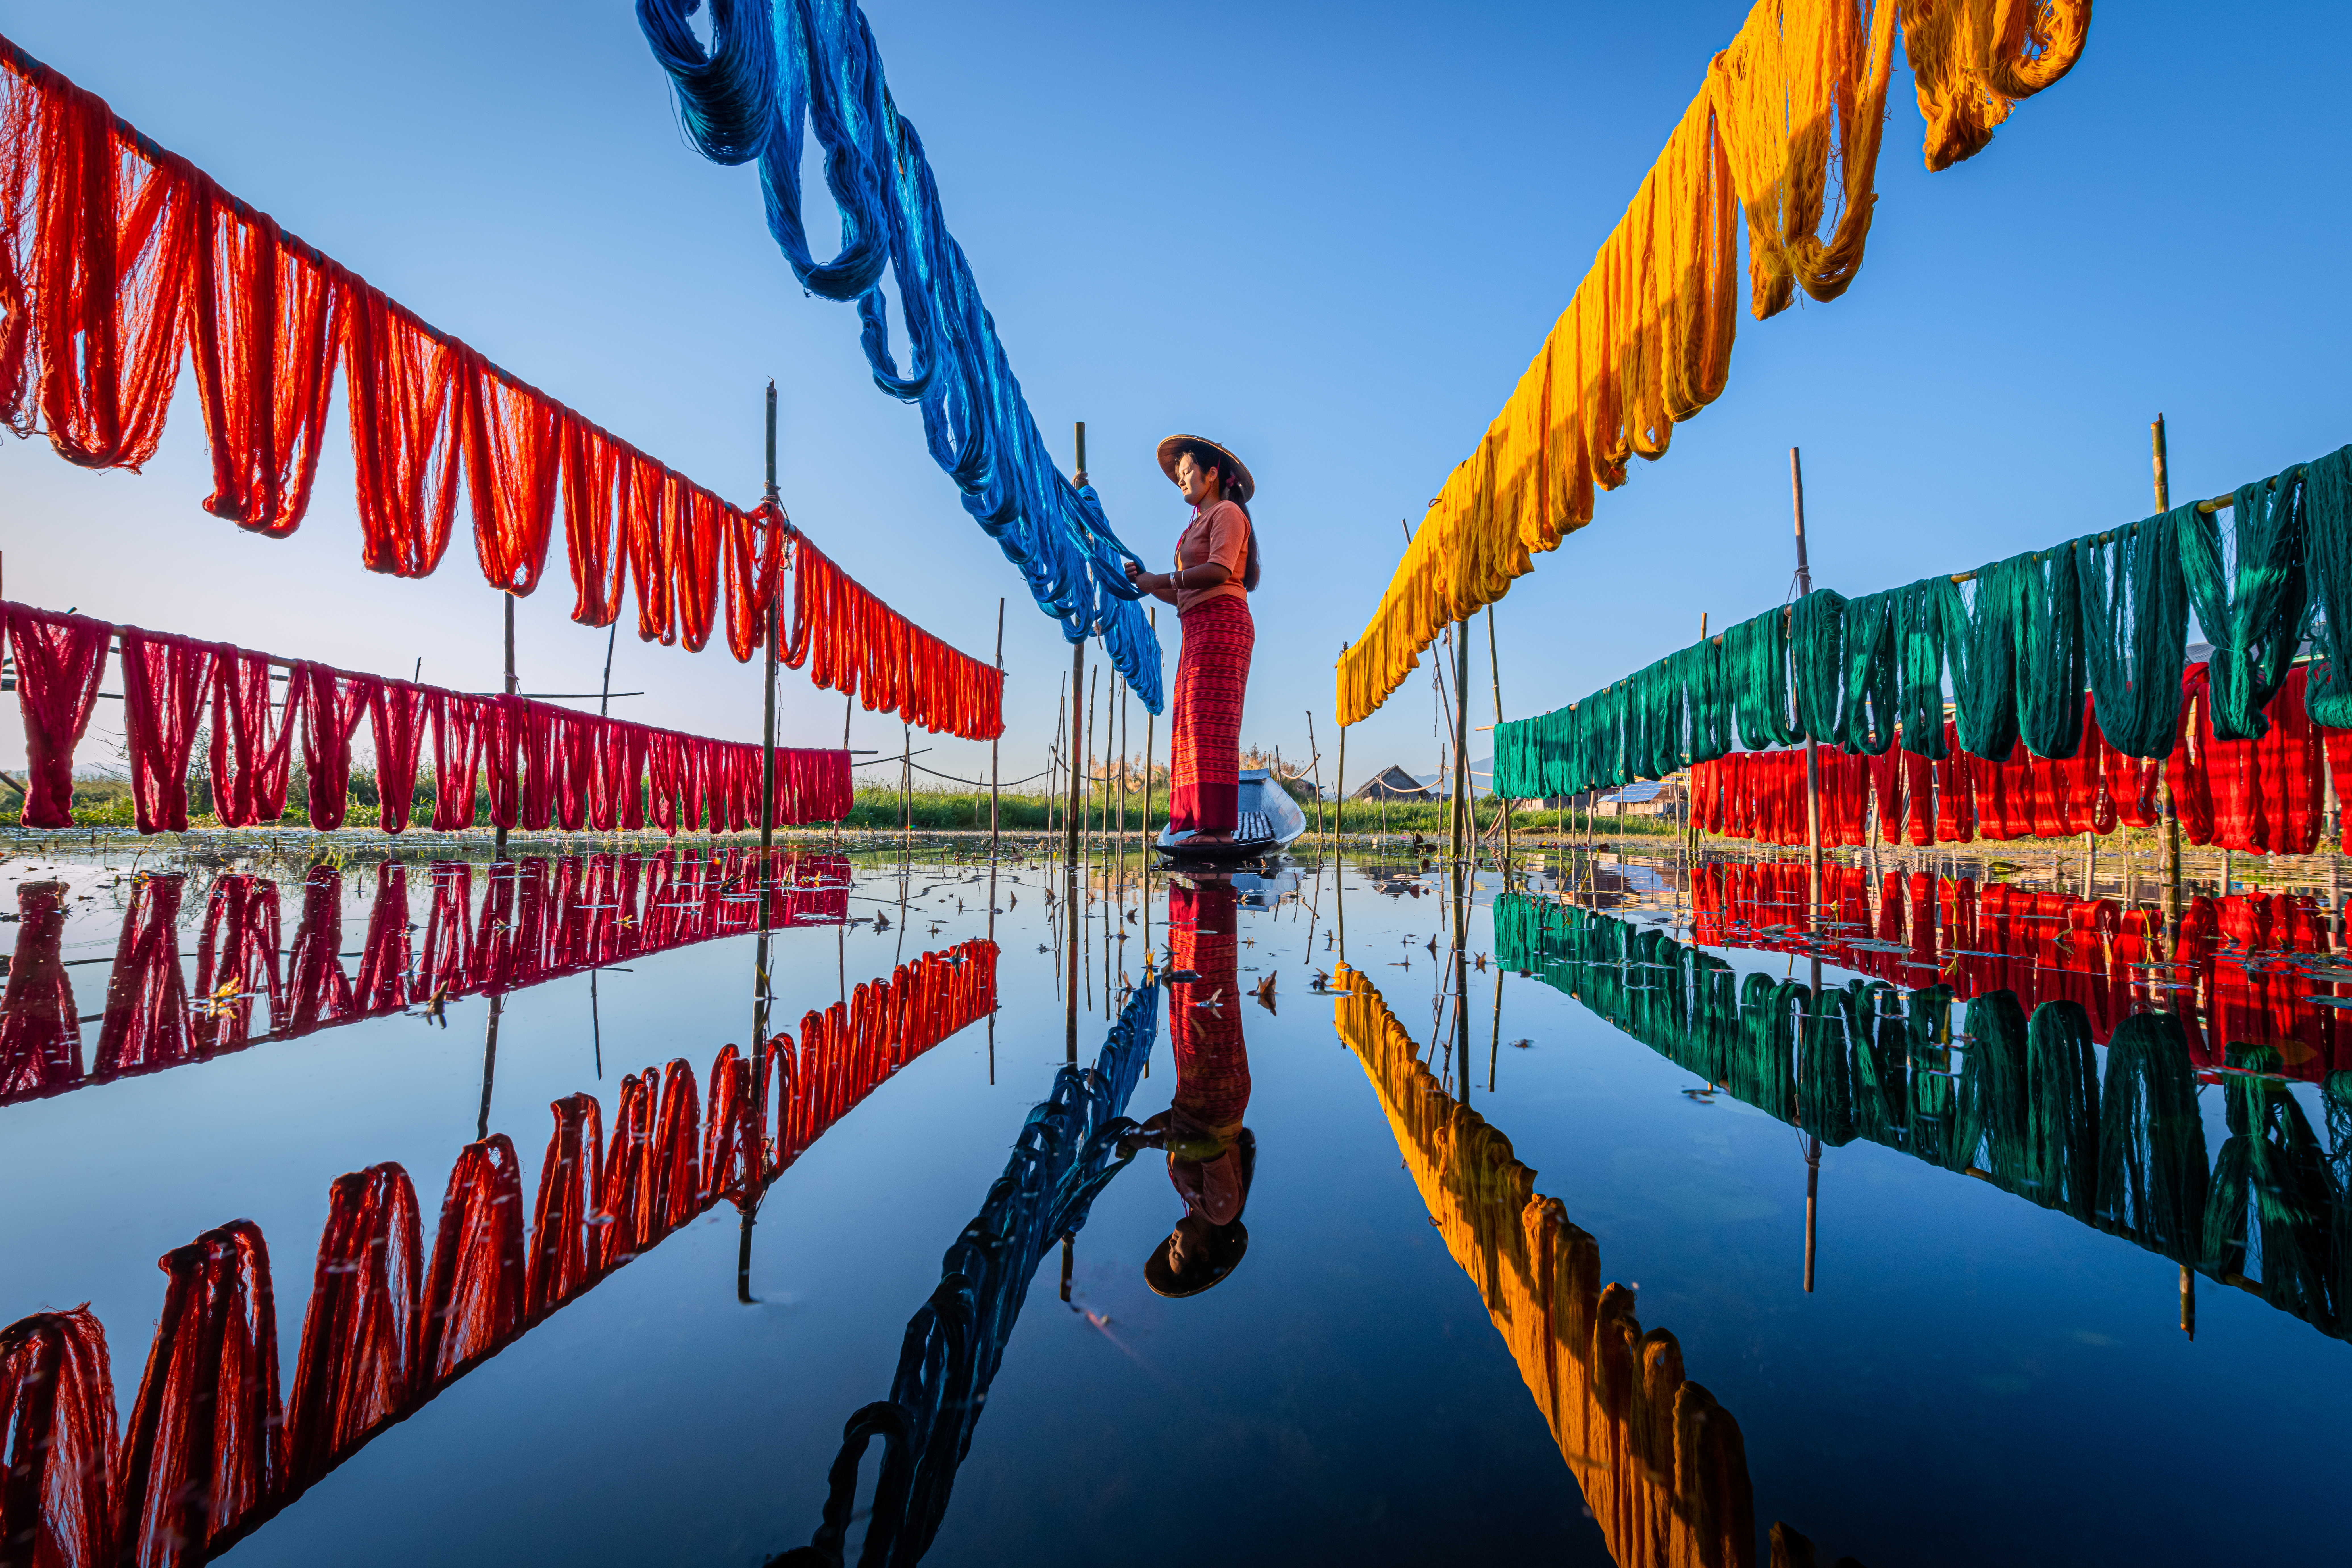 A woman hanging to dry clothes in rows of colourful clothes.